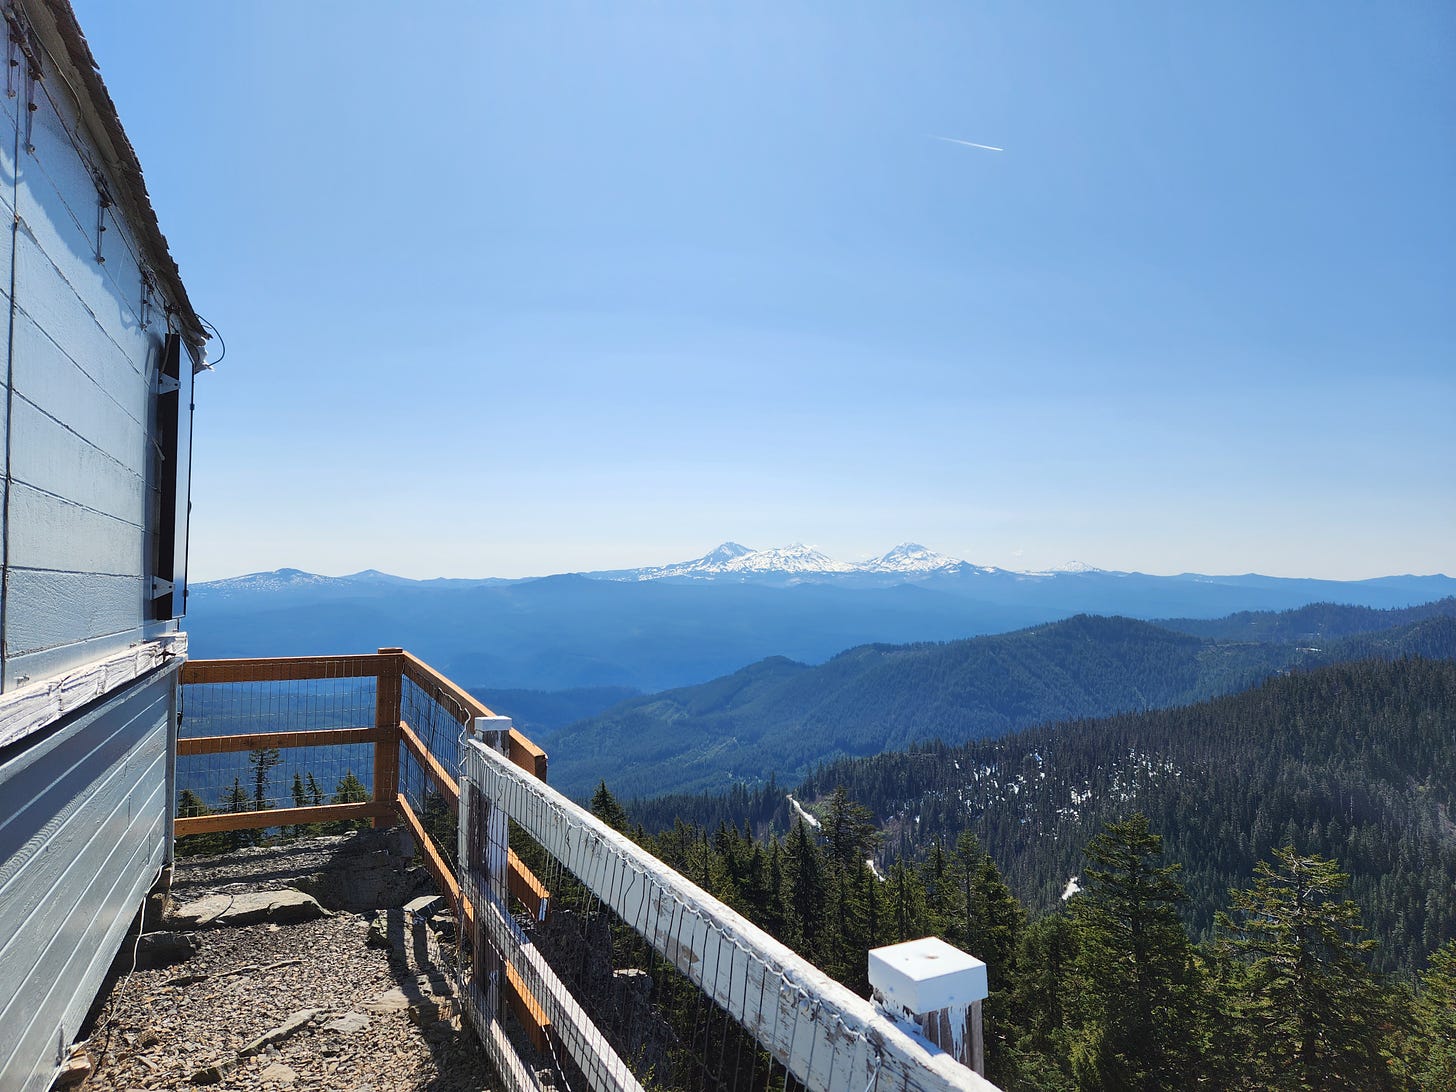 edge of white lookout building with snow-covered mountains in teh distance, forests in between